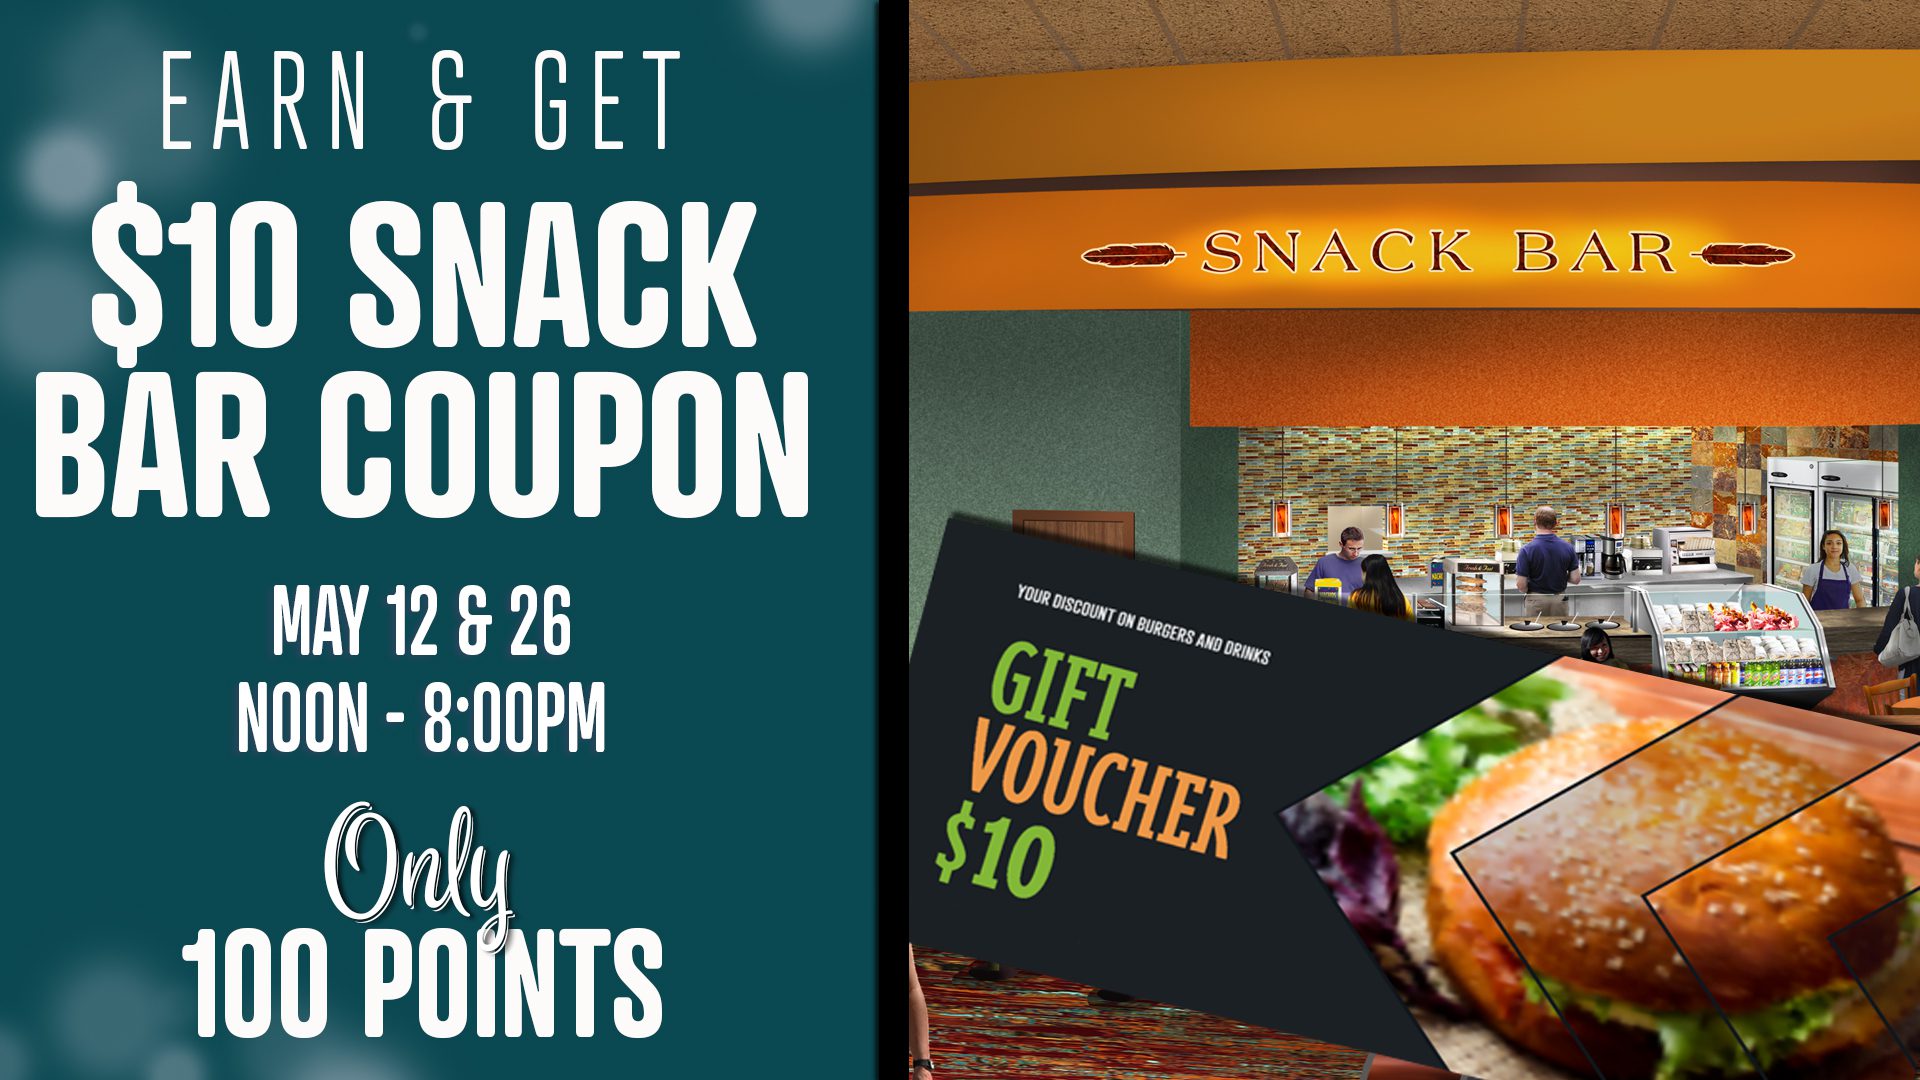 Promotional poster offering a $10 snack bar coupon for earning 100 points on specific dates at a venue's snack bar.